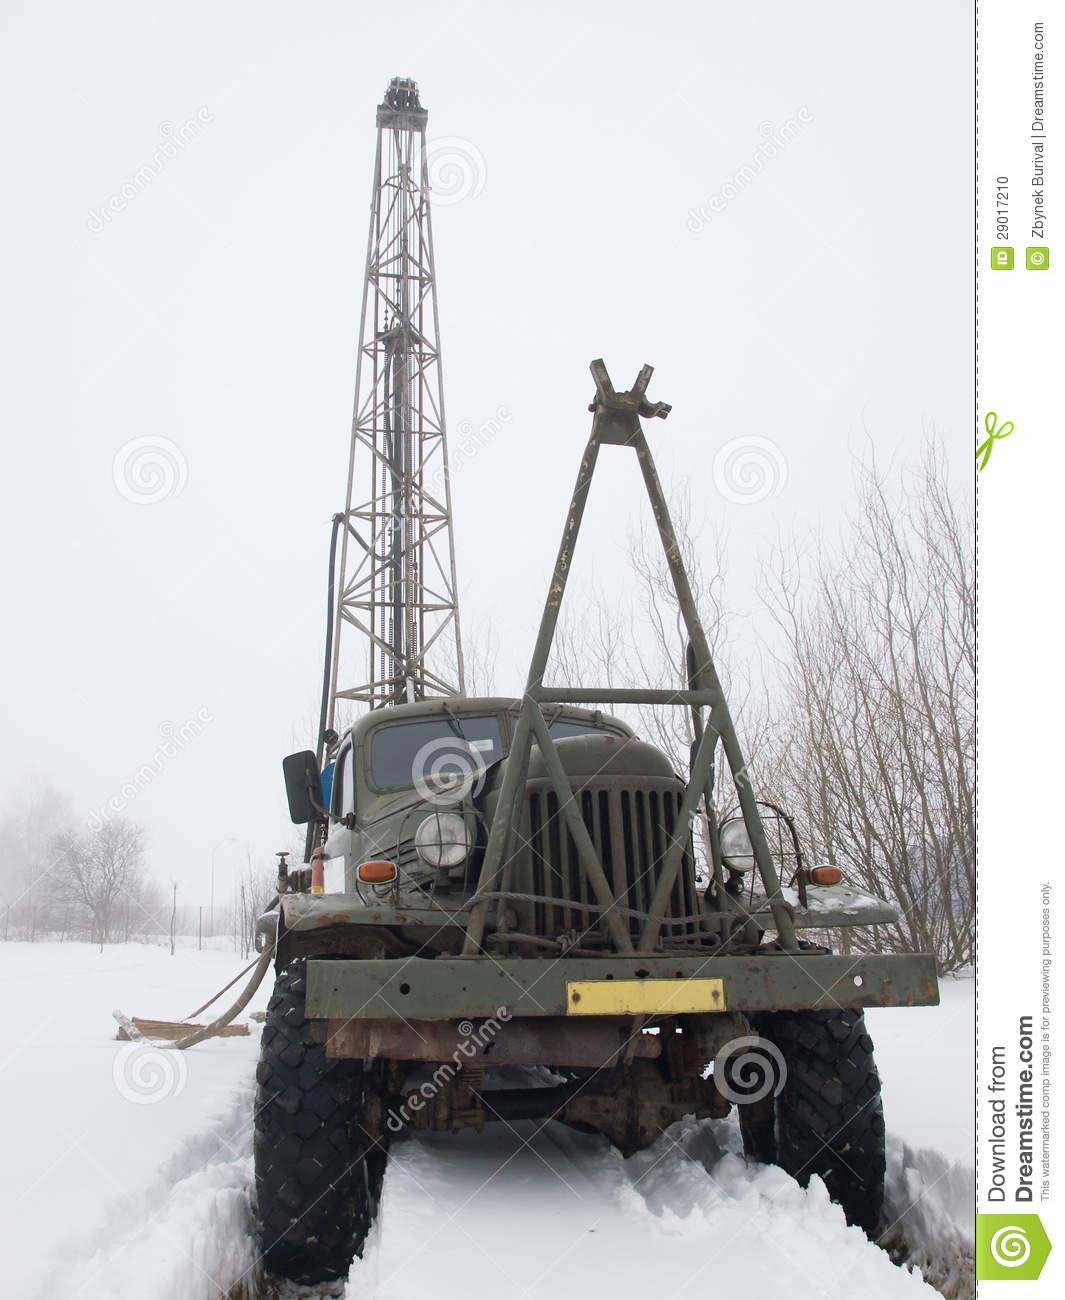 Mobile Drilling Rig On The Truck Stock Photo   Image  29017210